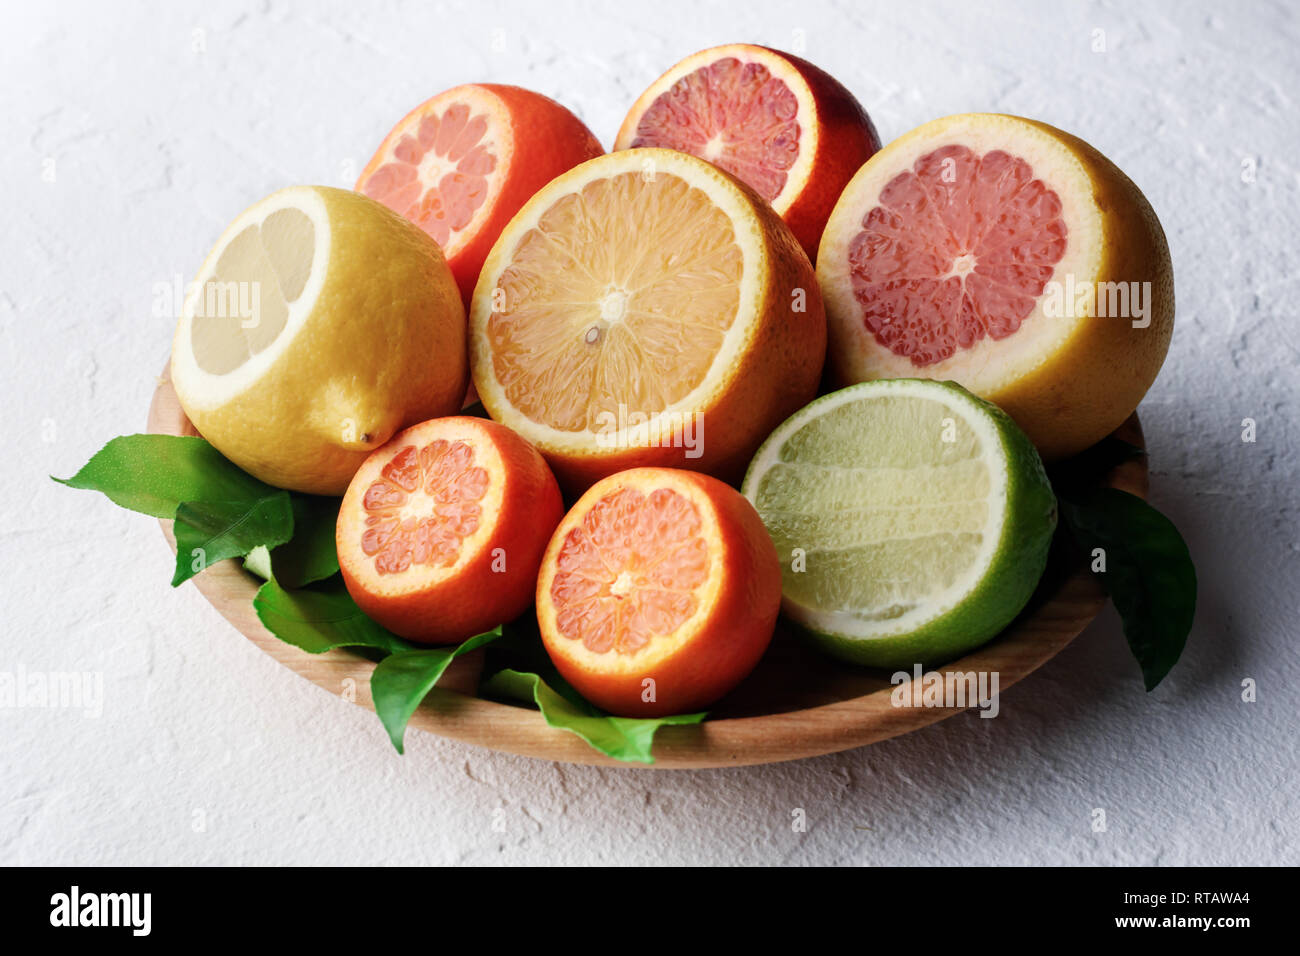 Mix of different citrus fruits closeup. Healthy diet vitamin concept. Food photography Stock Photo